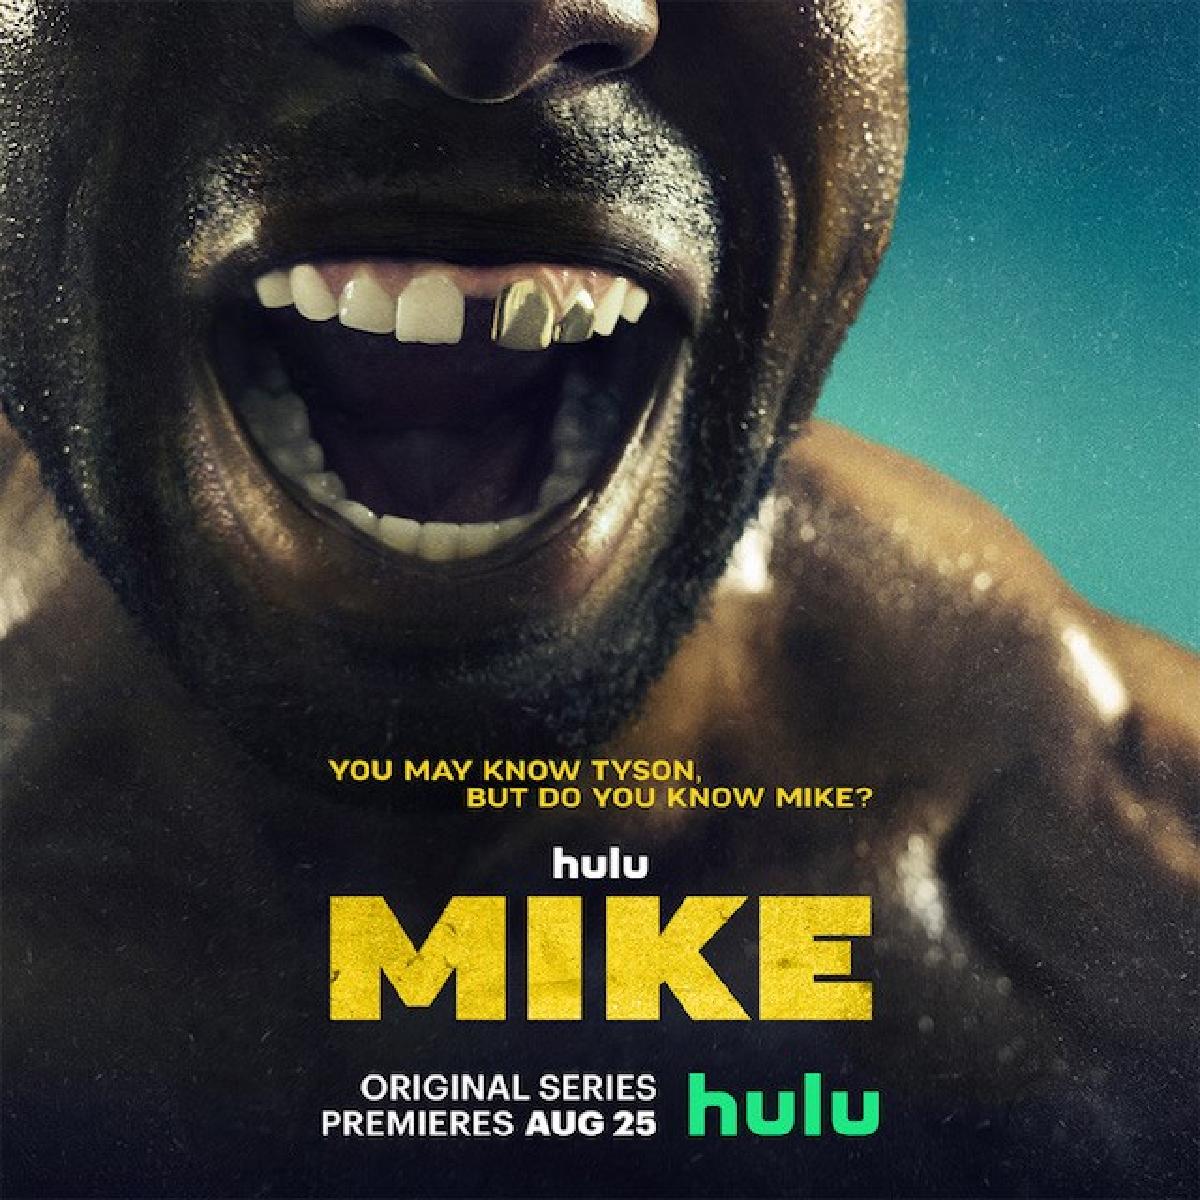 Mike Trailer Is Out, A Series Based On Mike Tyson